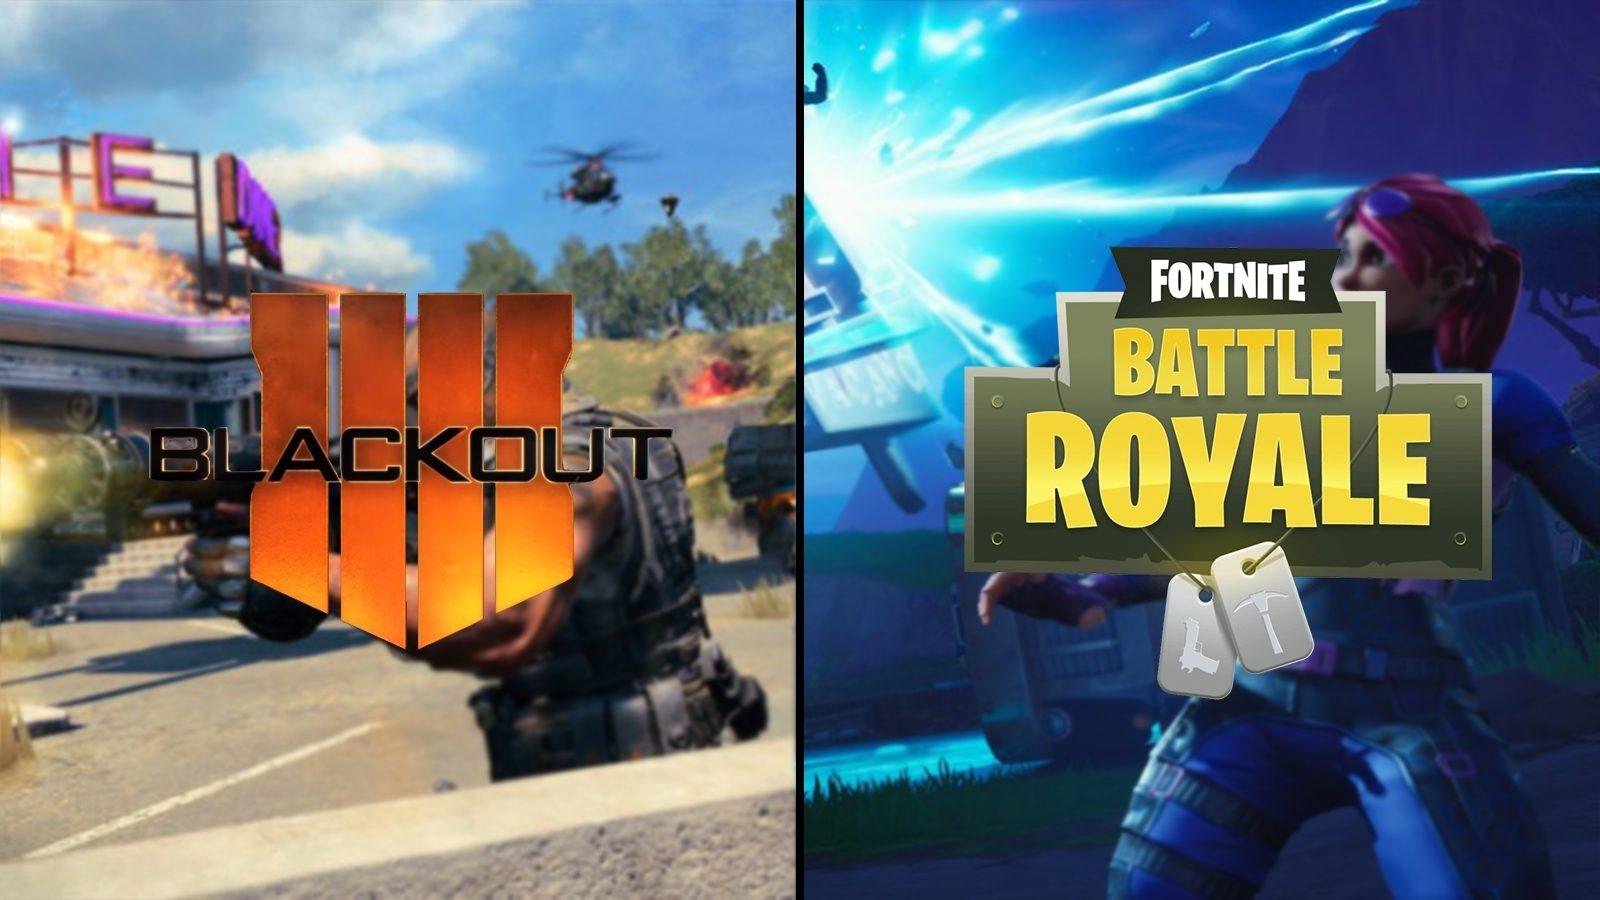 Fortnite' Vs. 'PUBG': How Battle Royale Games May Have Peaked